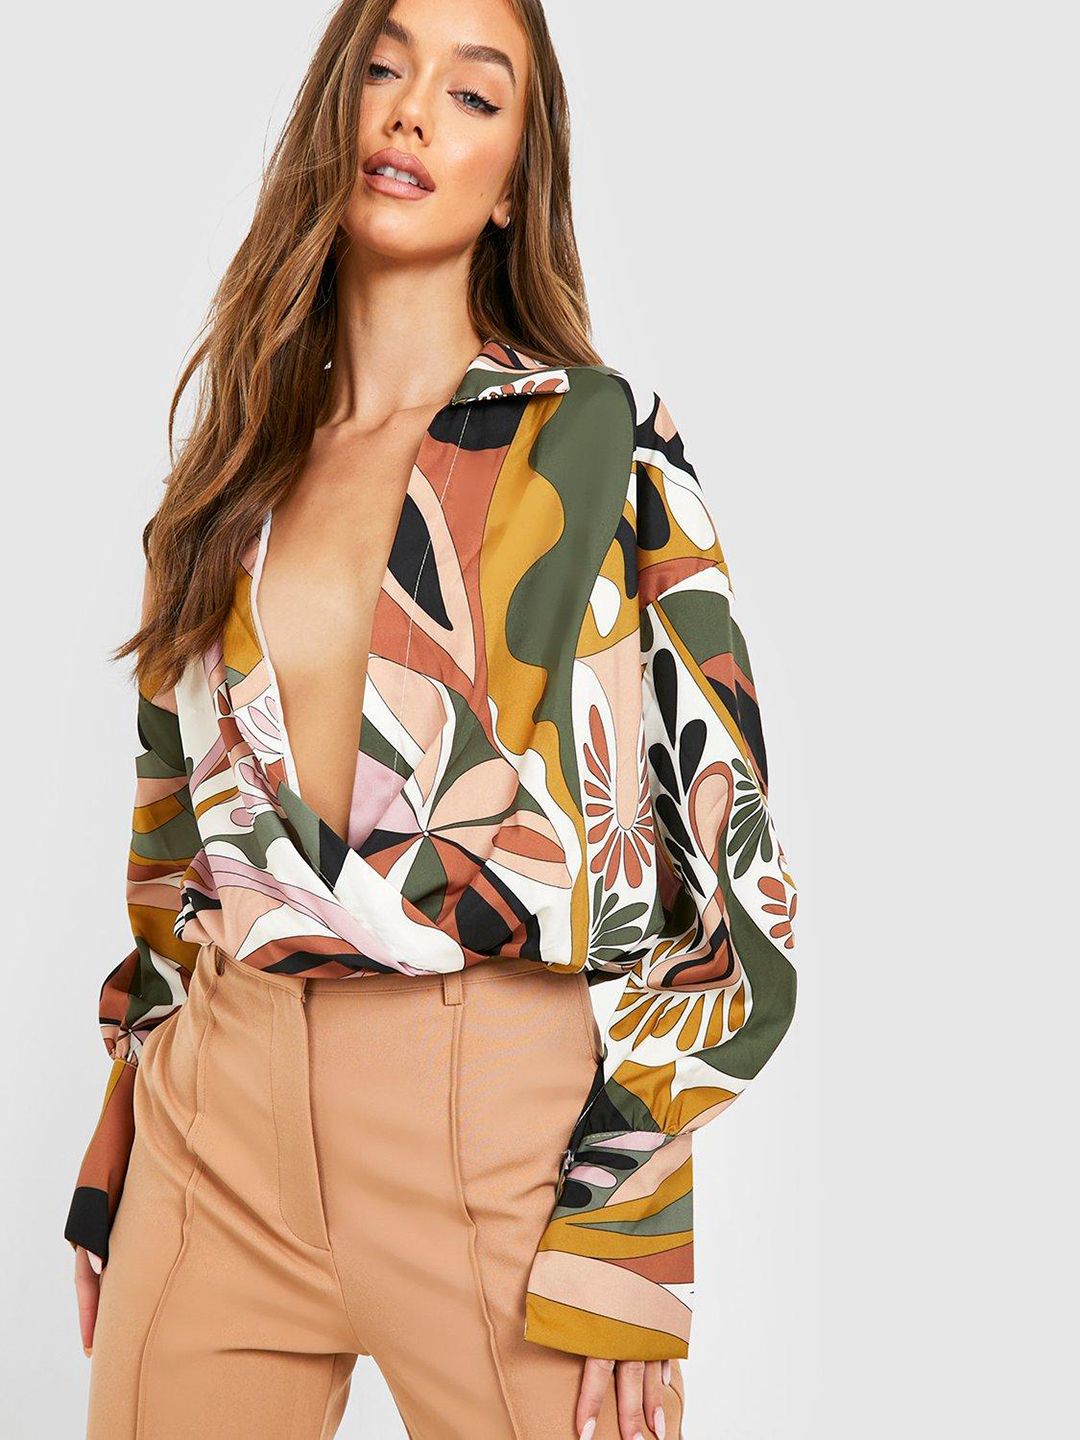 Boohoo Olive Green & White Print Wrap Top Price in India